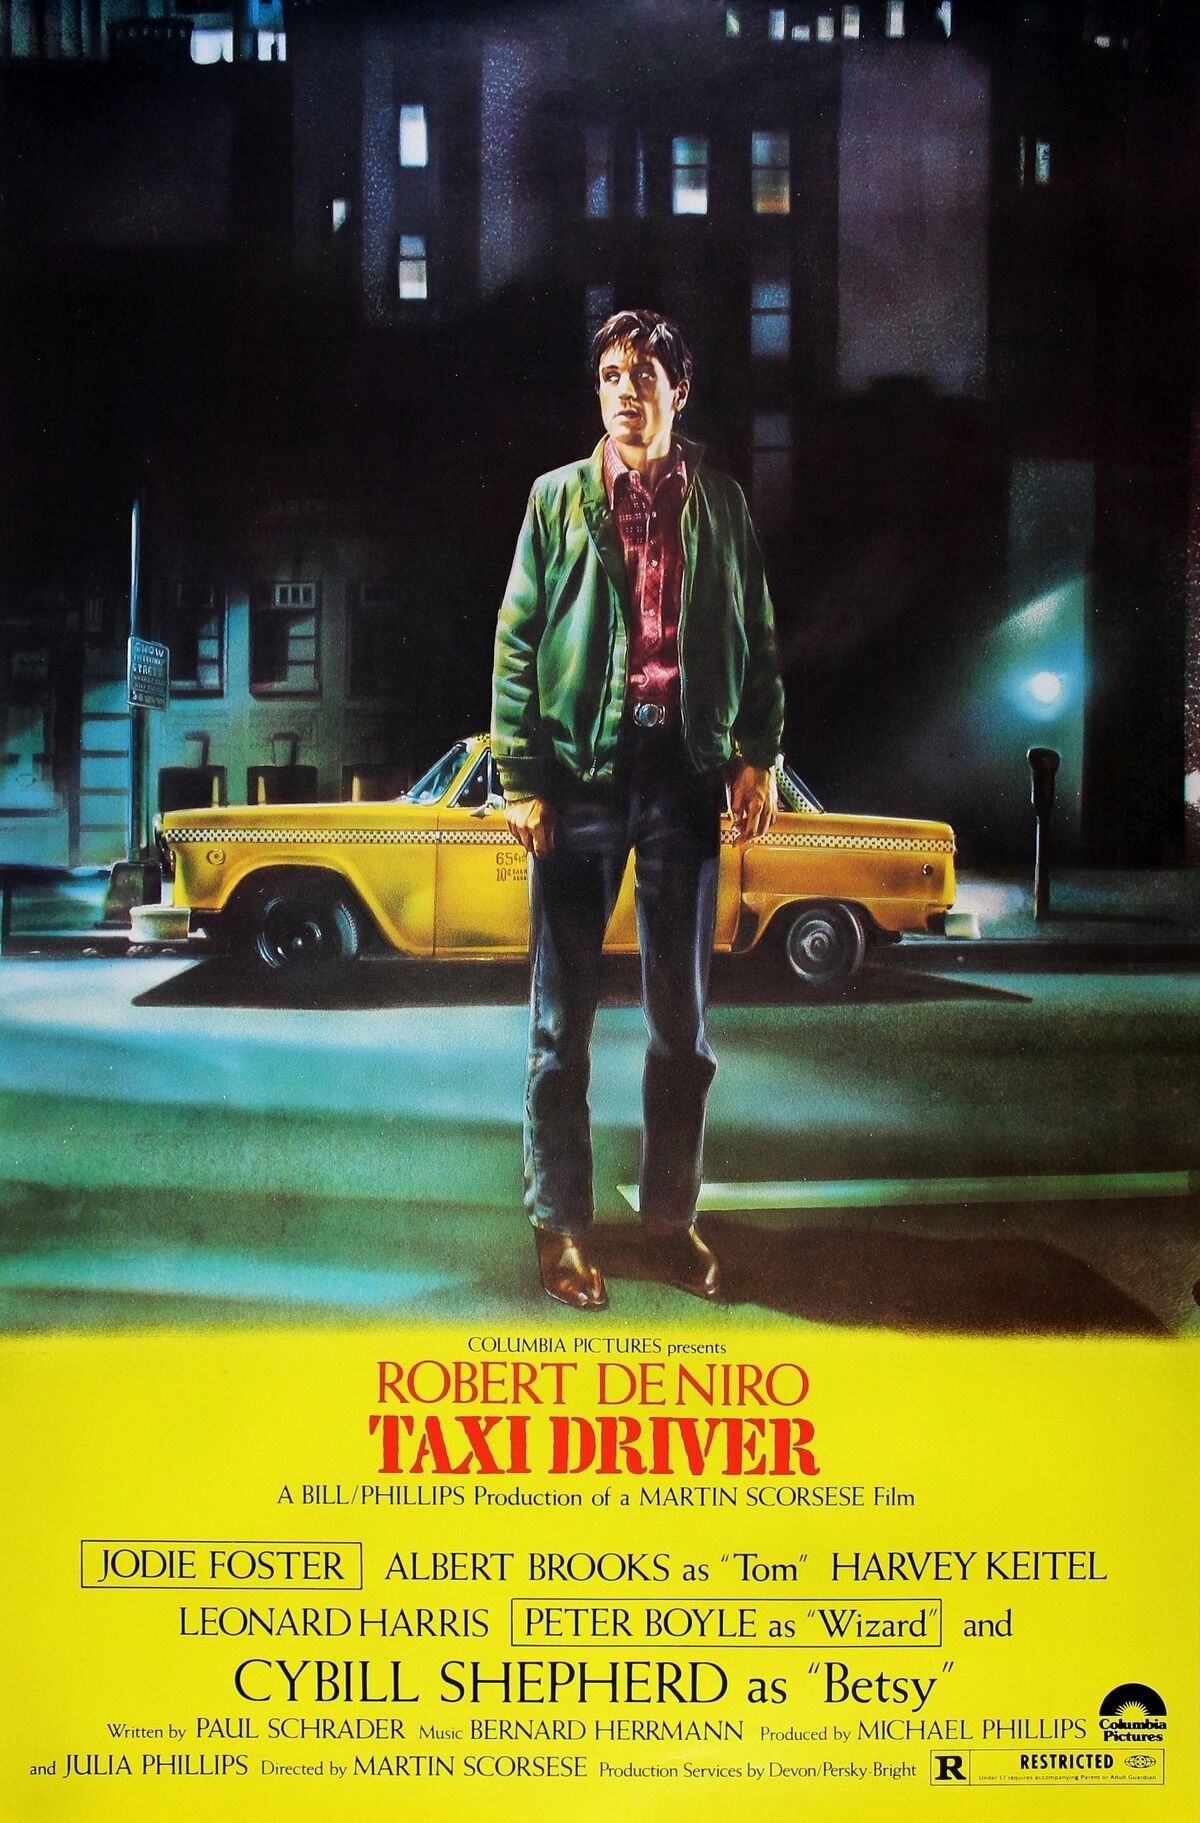 tom cruise taxi driver